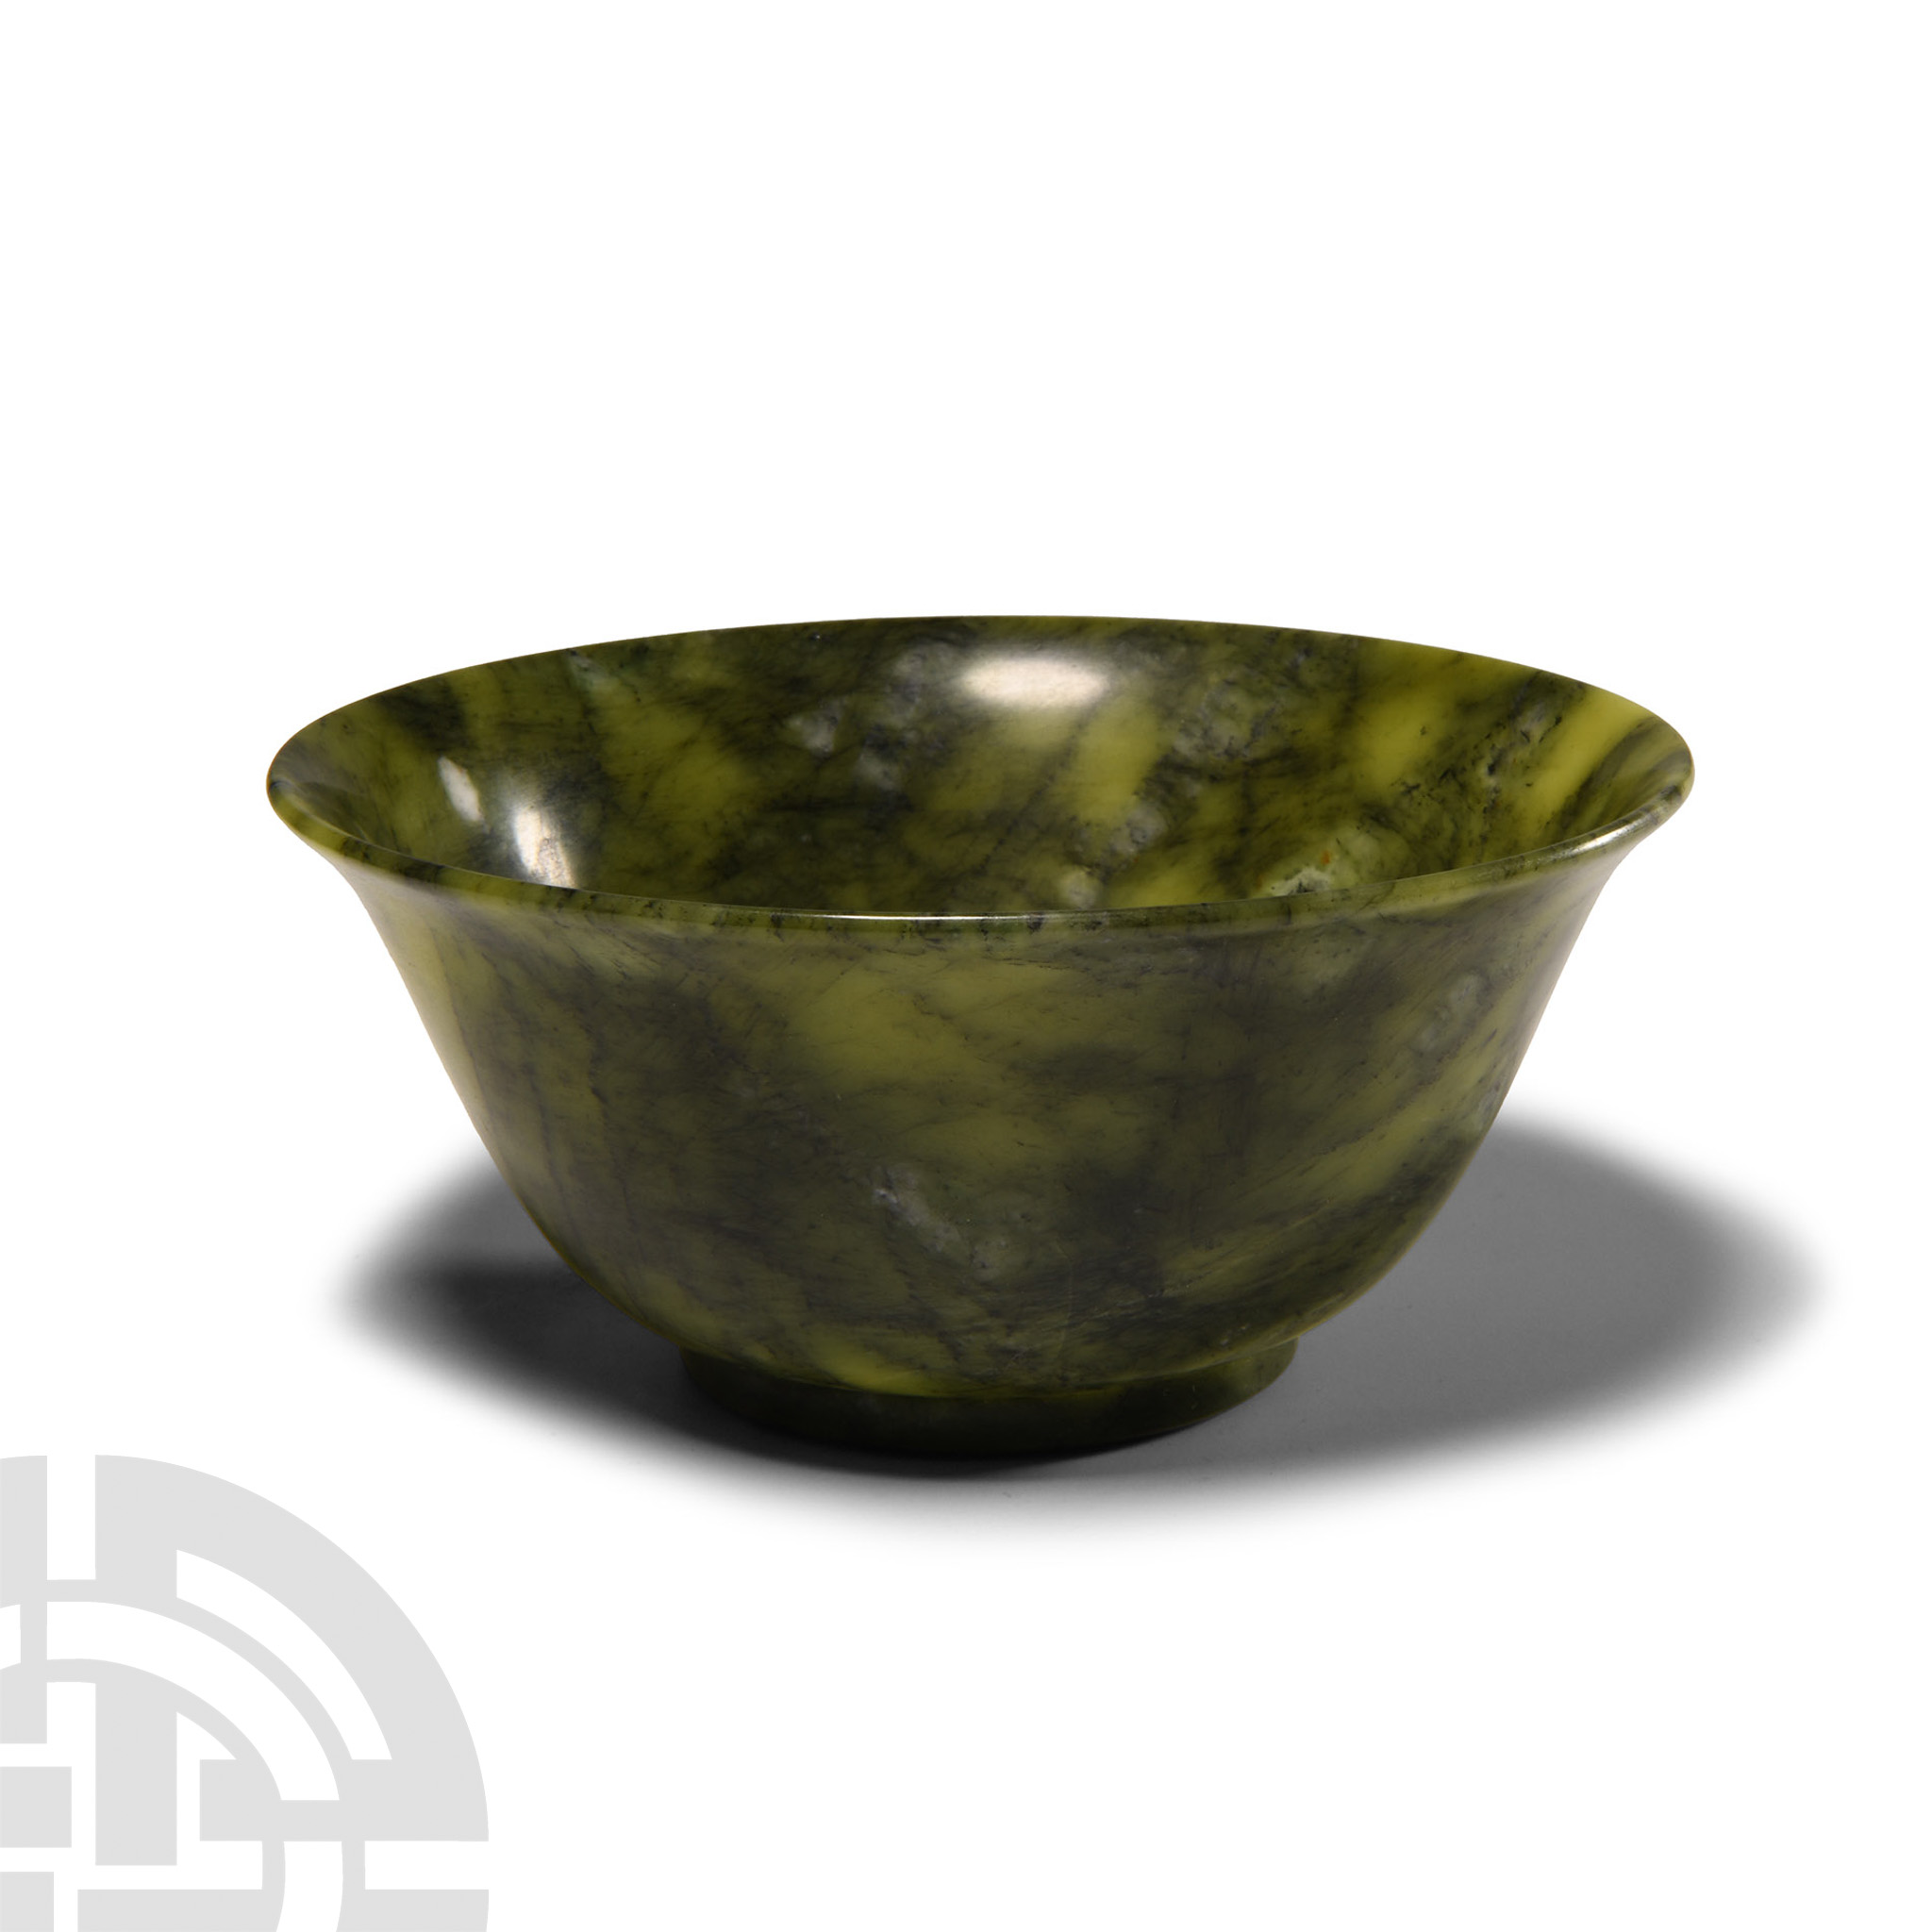 Chinese Mottled Green Jade or Serpentine Bowl